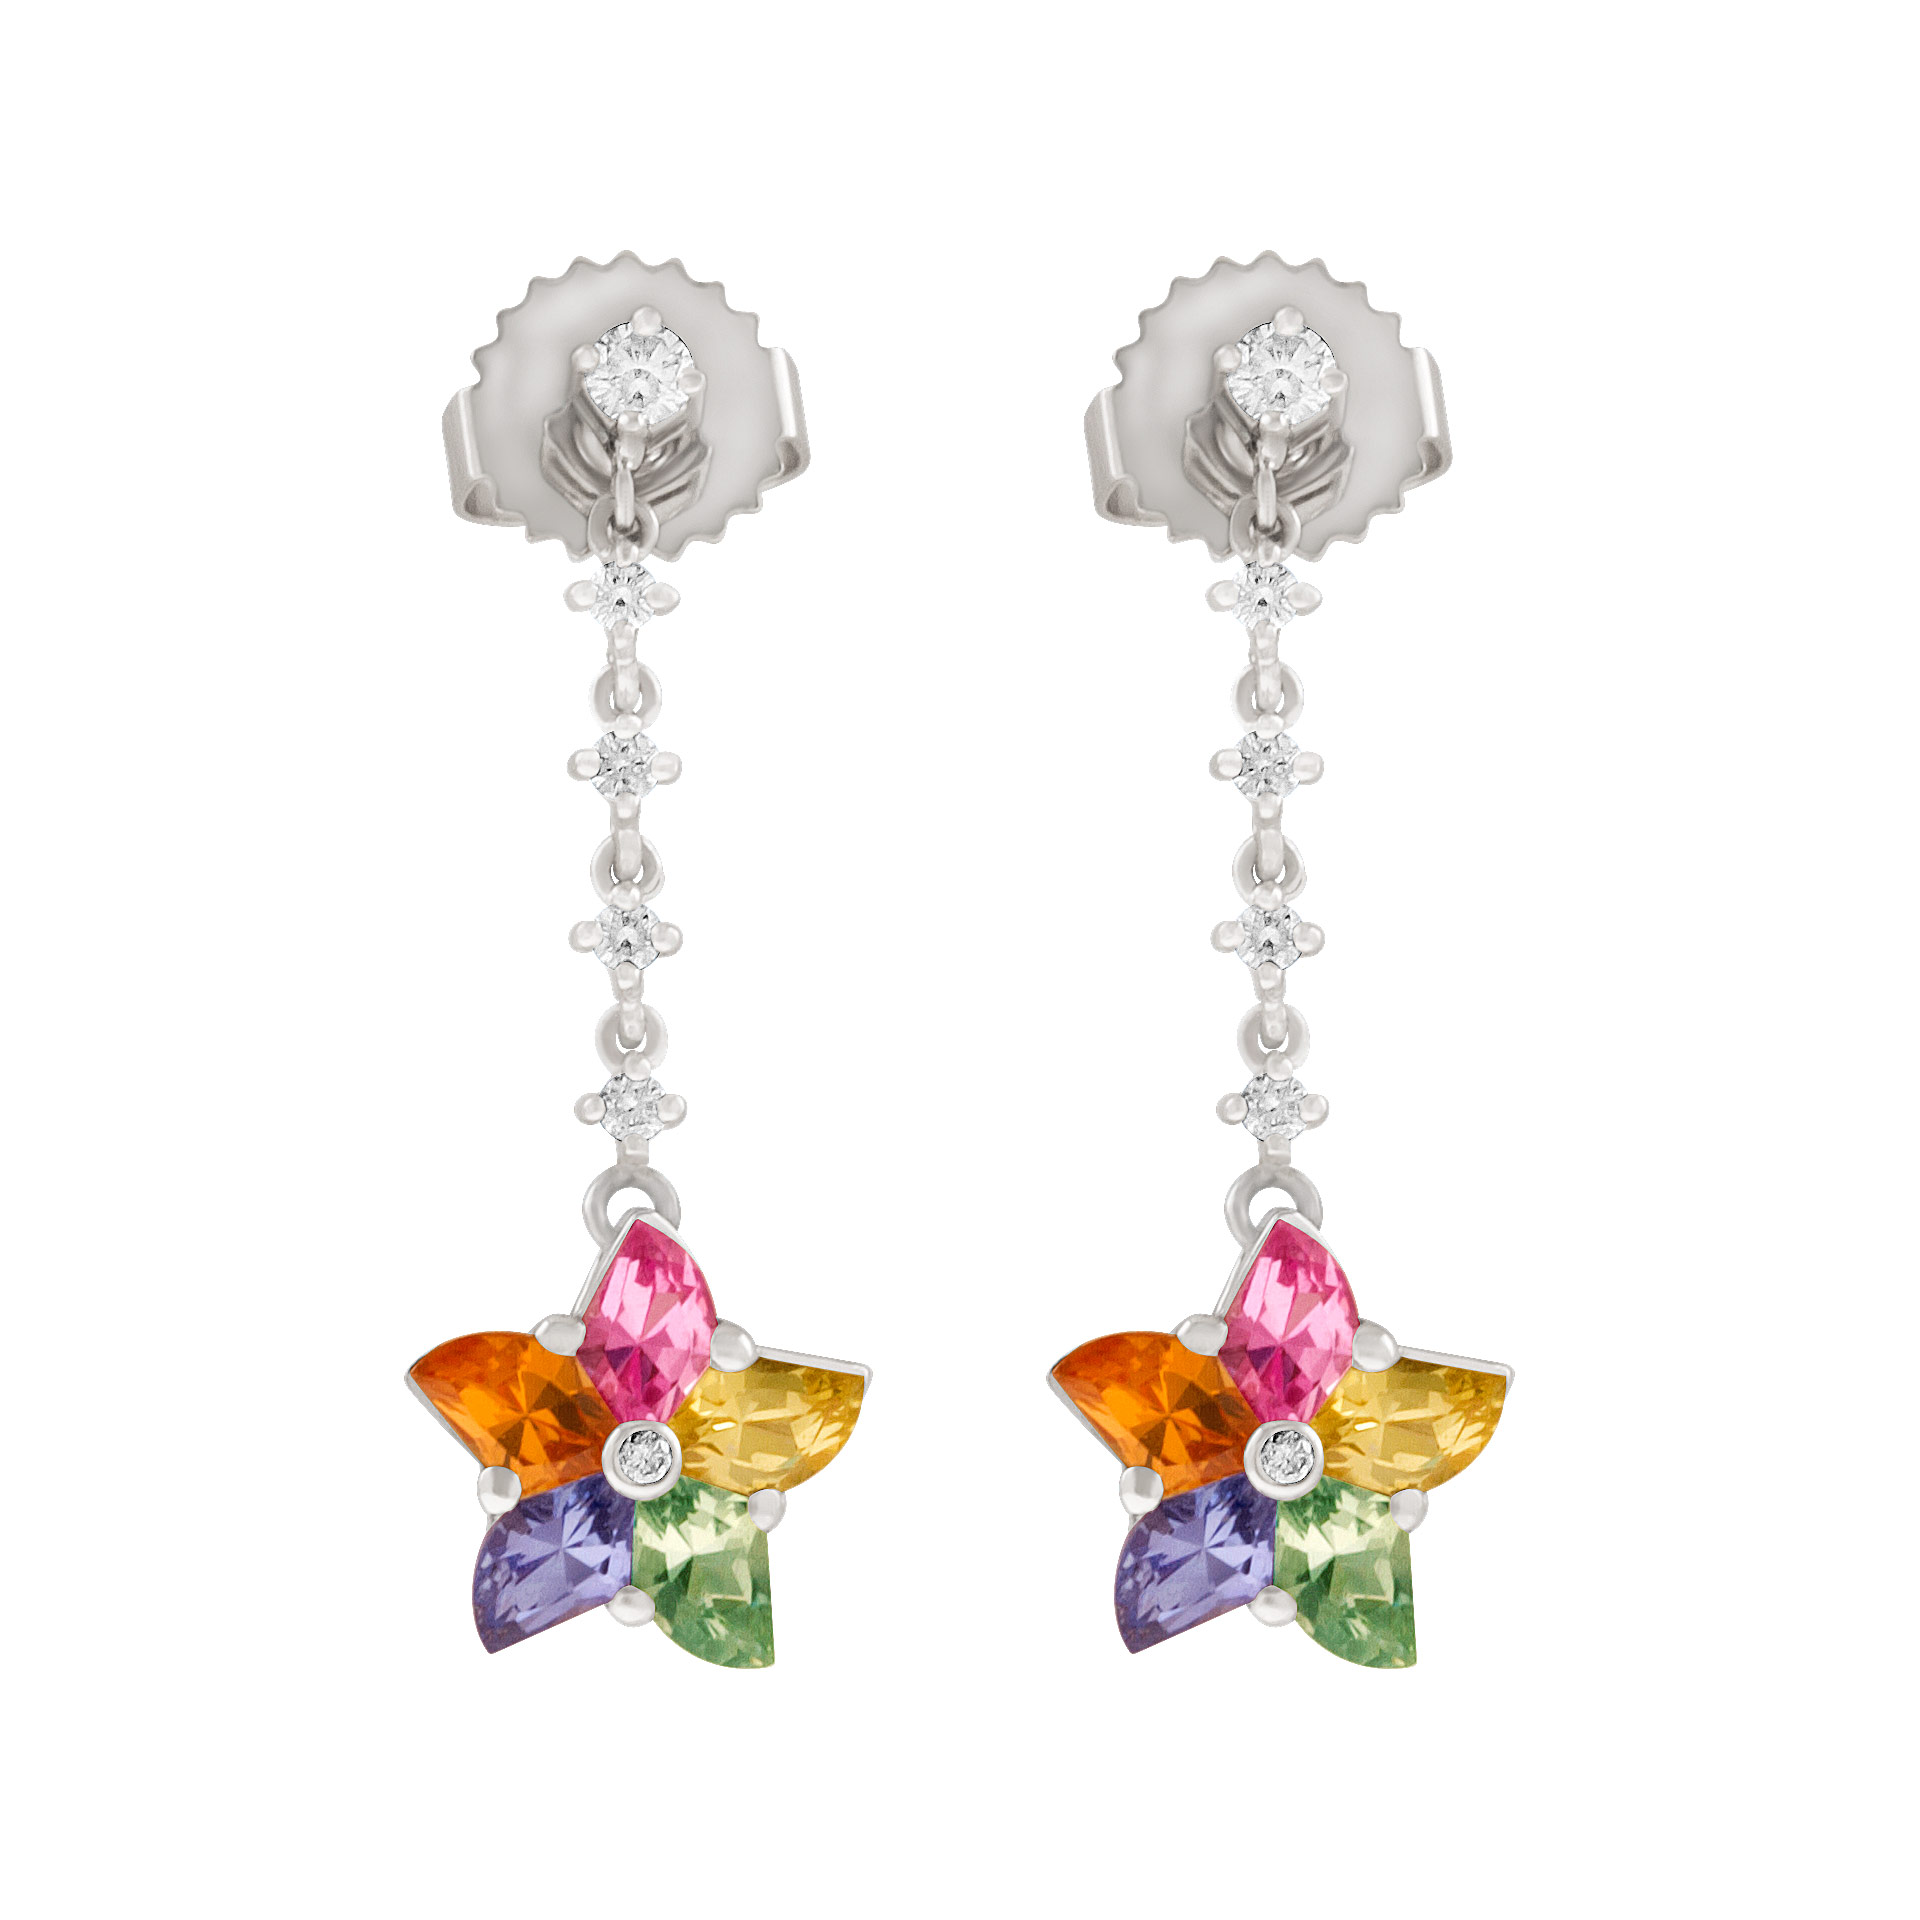 Diamond and sapphire drop earrings in floral style set in 18k white gold